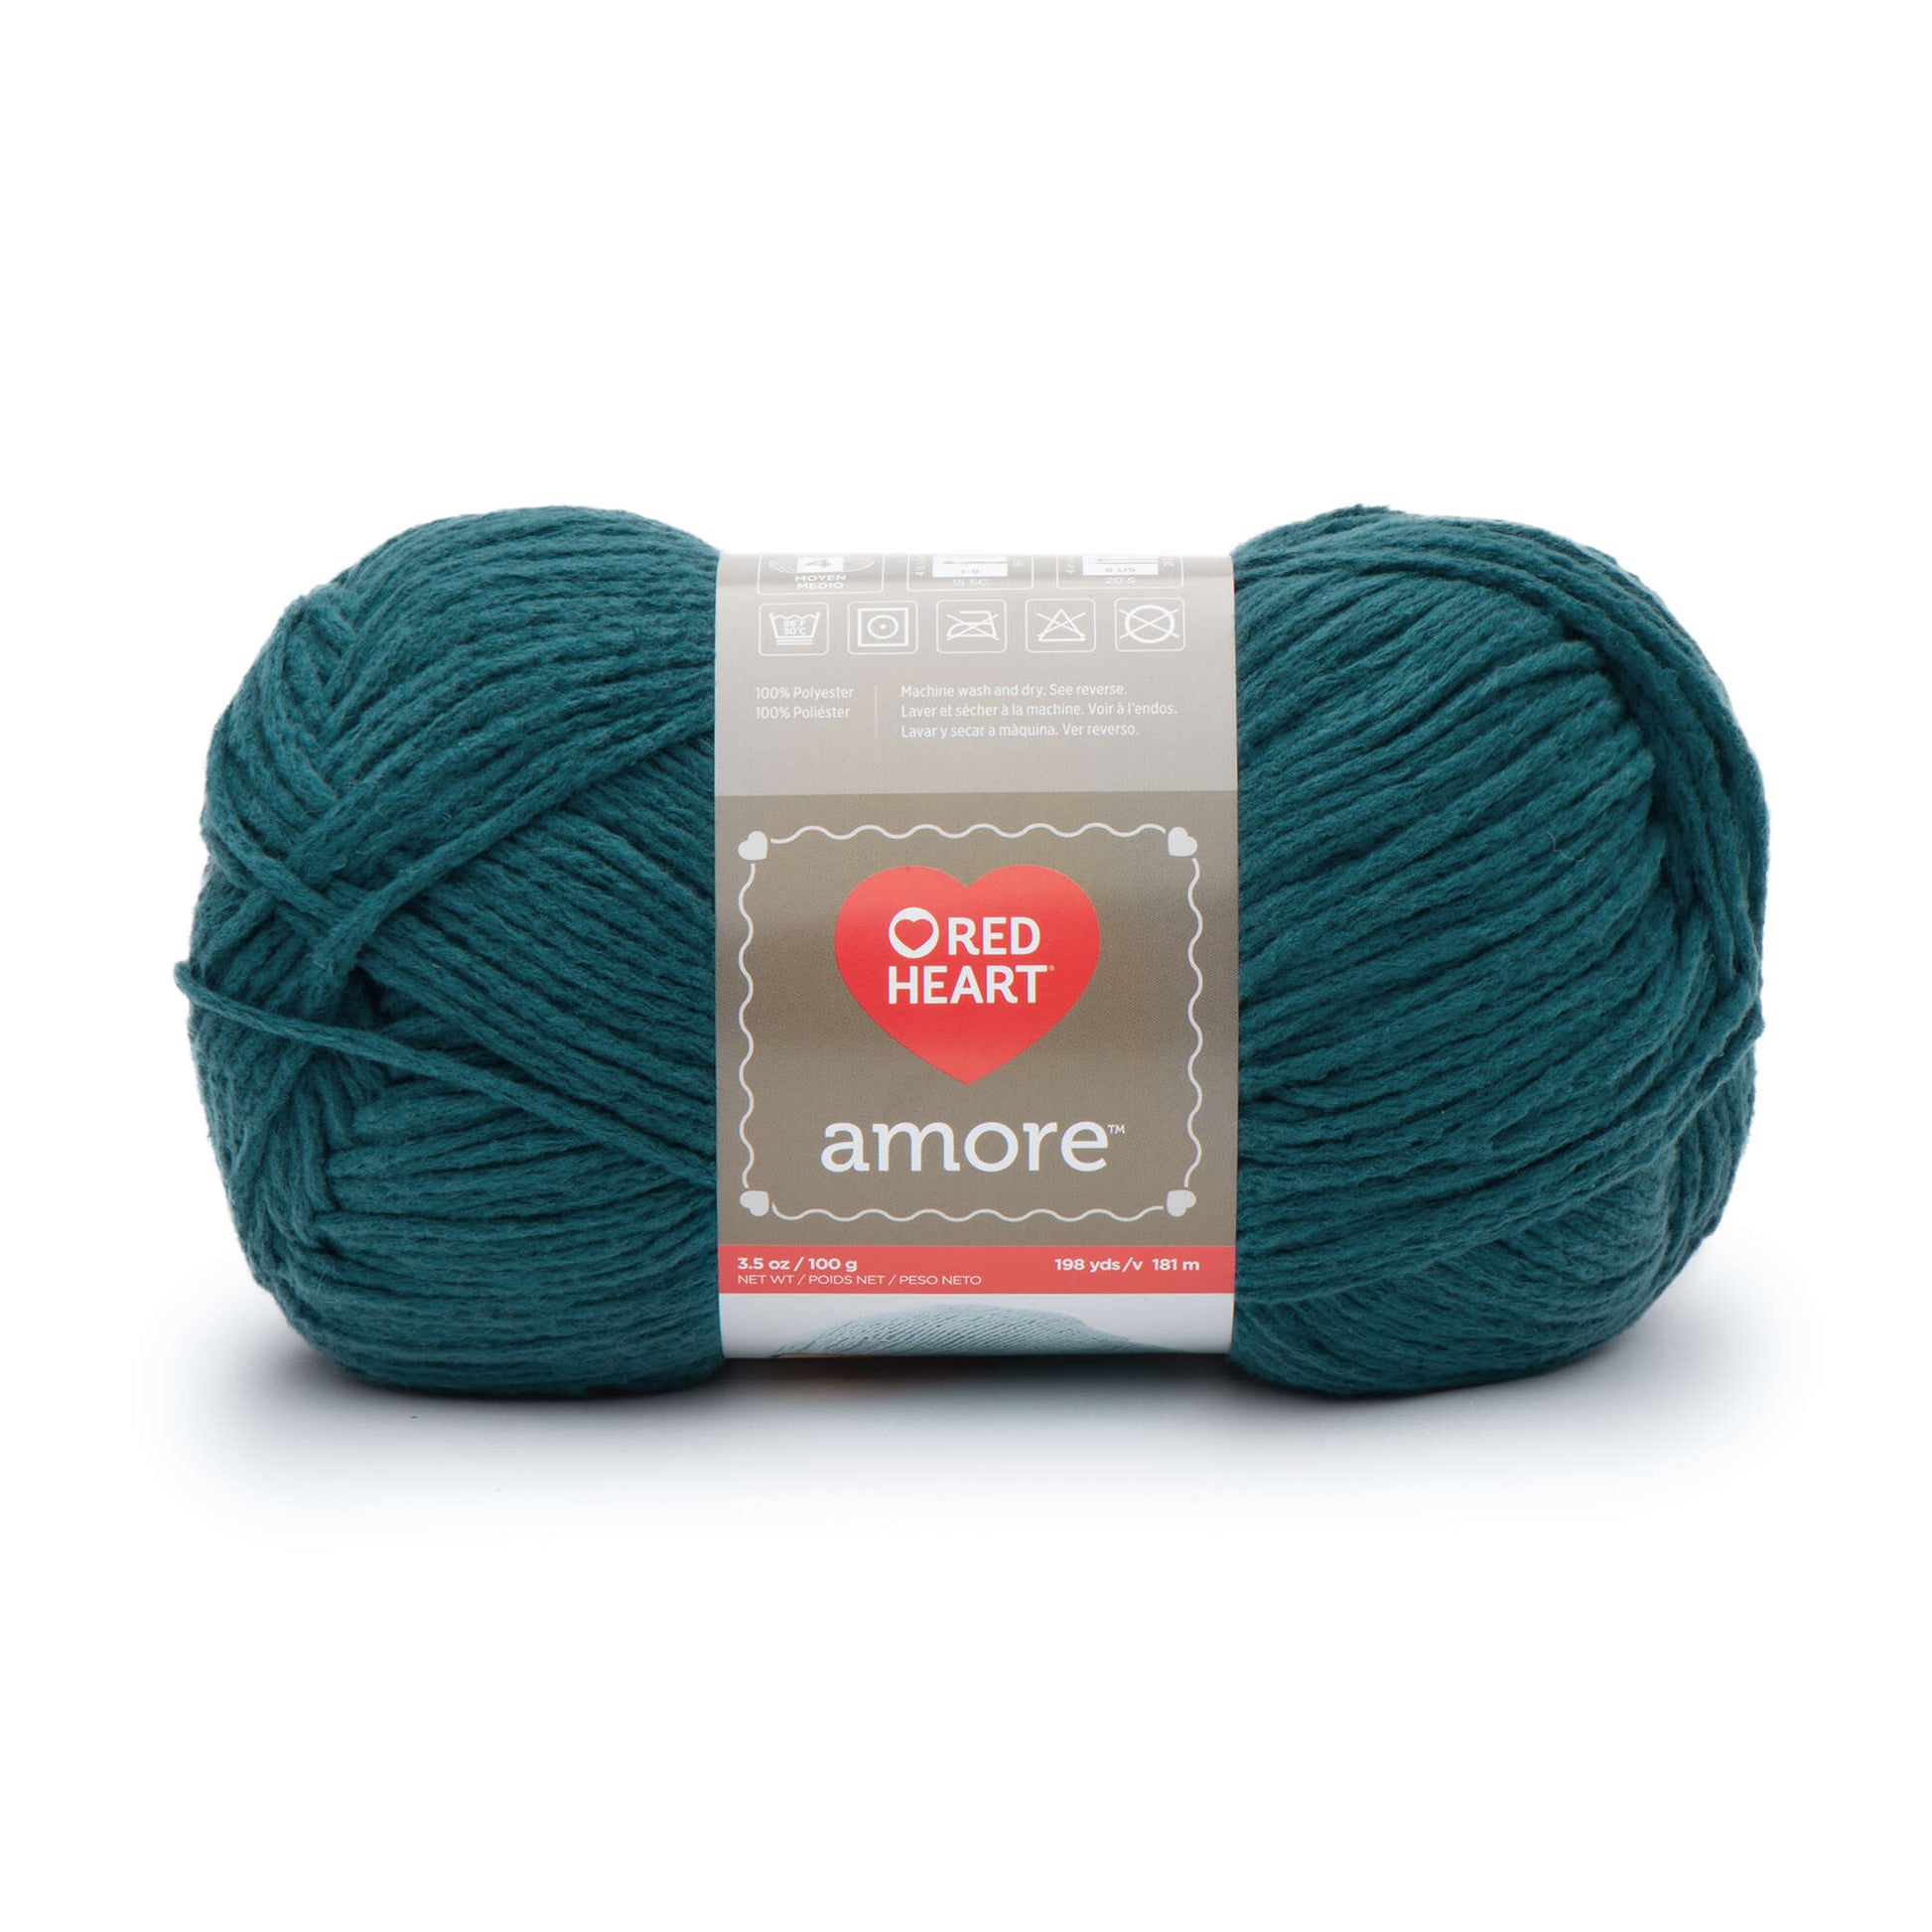 Red Heart Amore Yarn - Discontinued shades Bliss